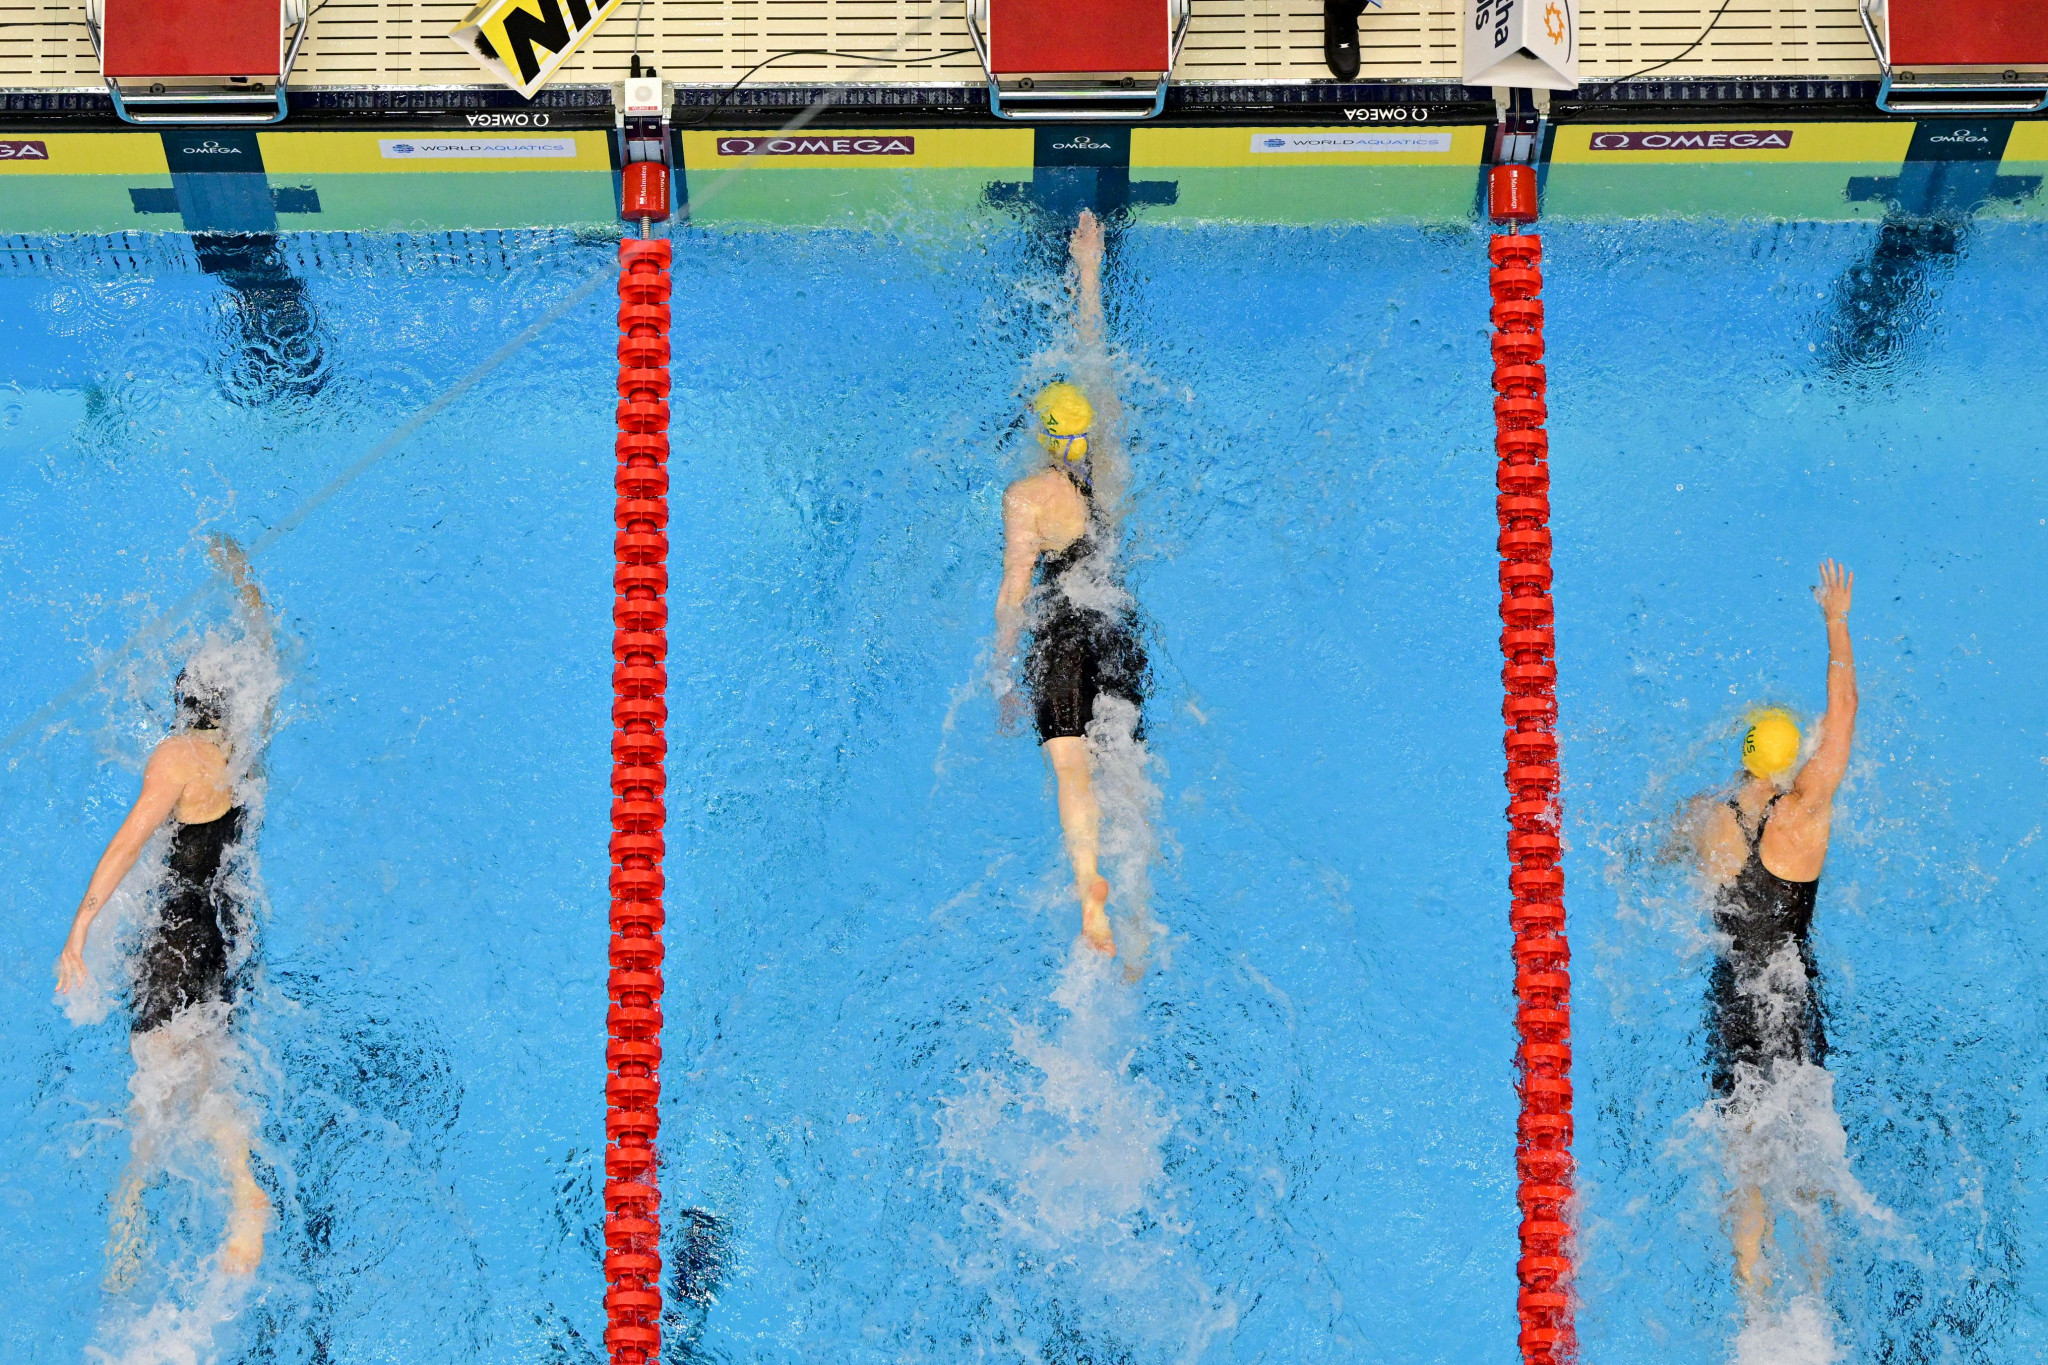 Mollie O'Callaghan defended her women's 100m freestyle title from last year with a time of 52.16 ©Getty Images